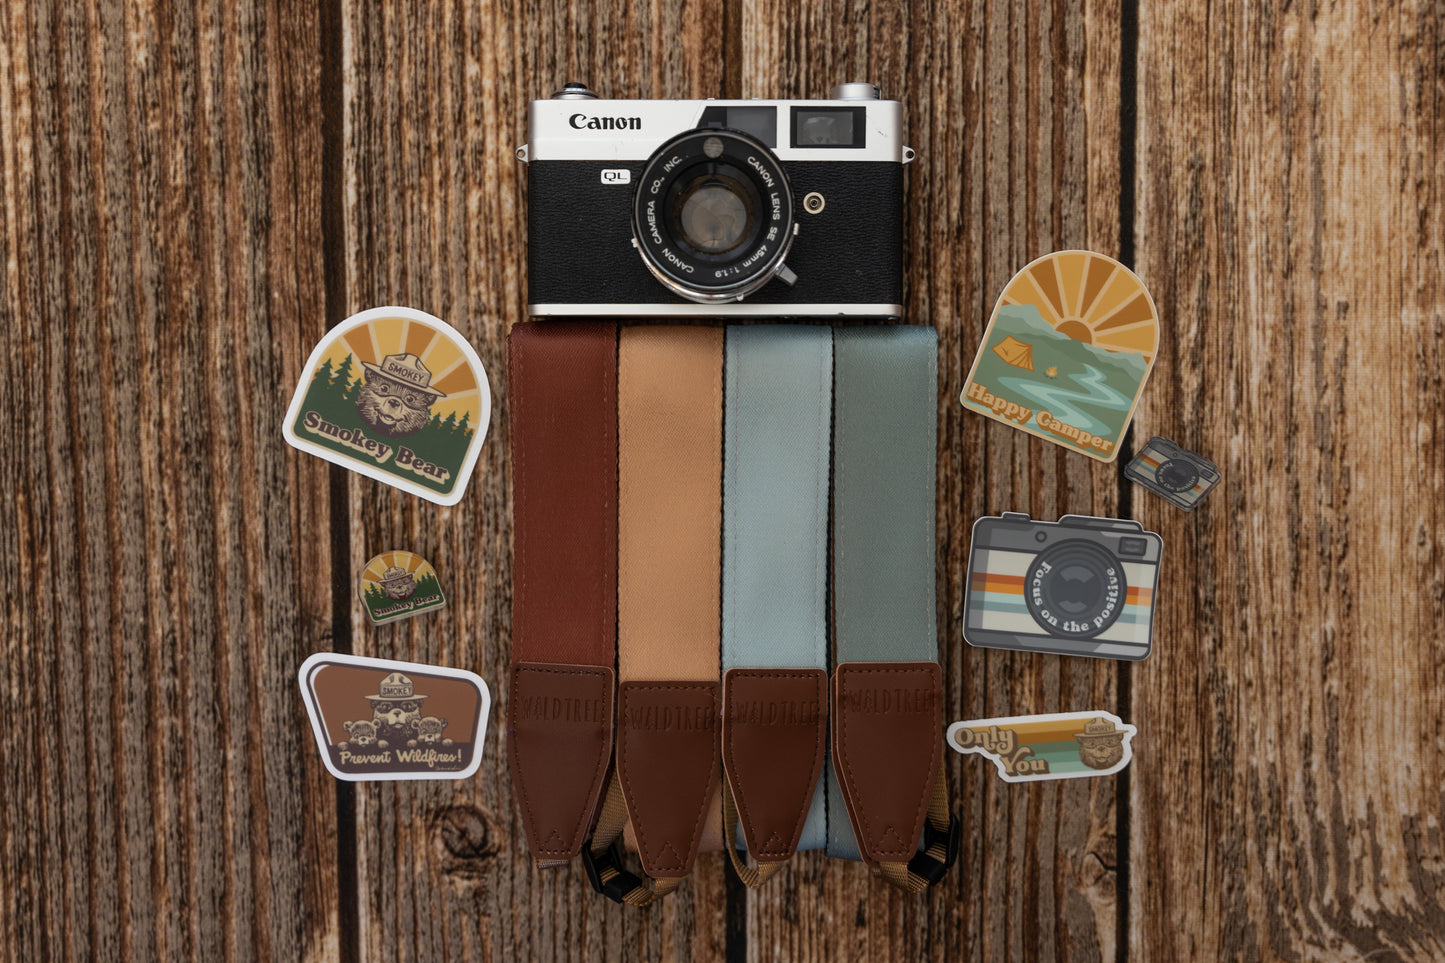 smokey bear sticker on wood background with other camera strap, stickers and pins